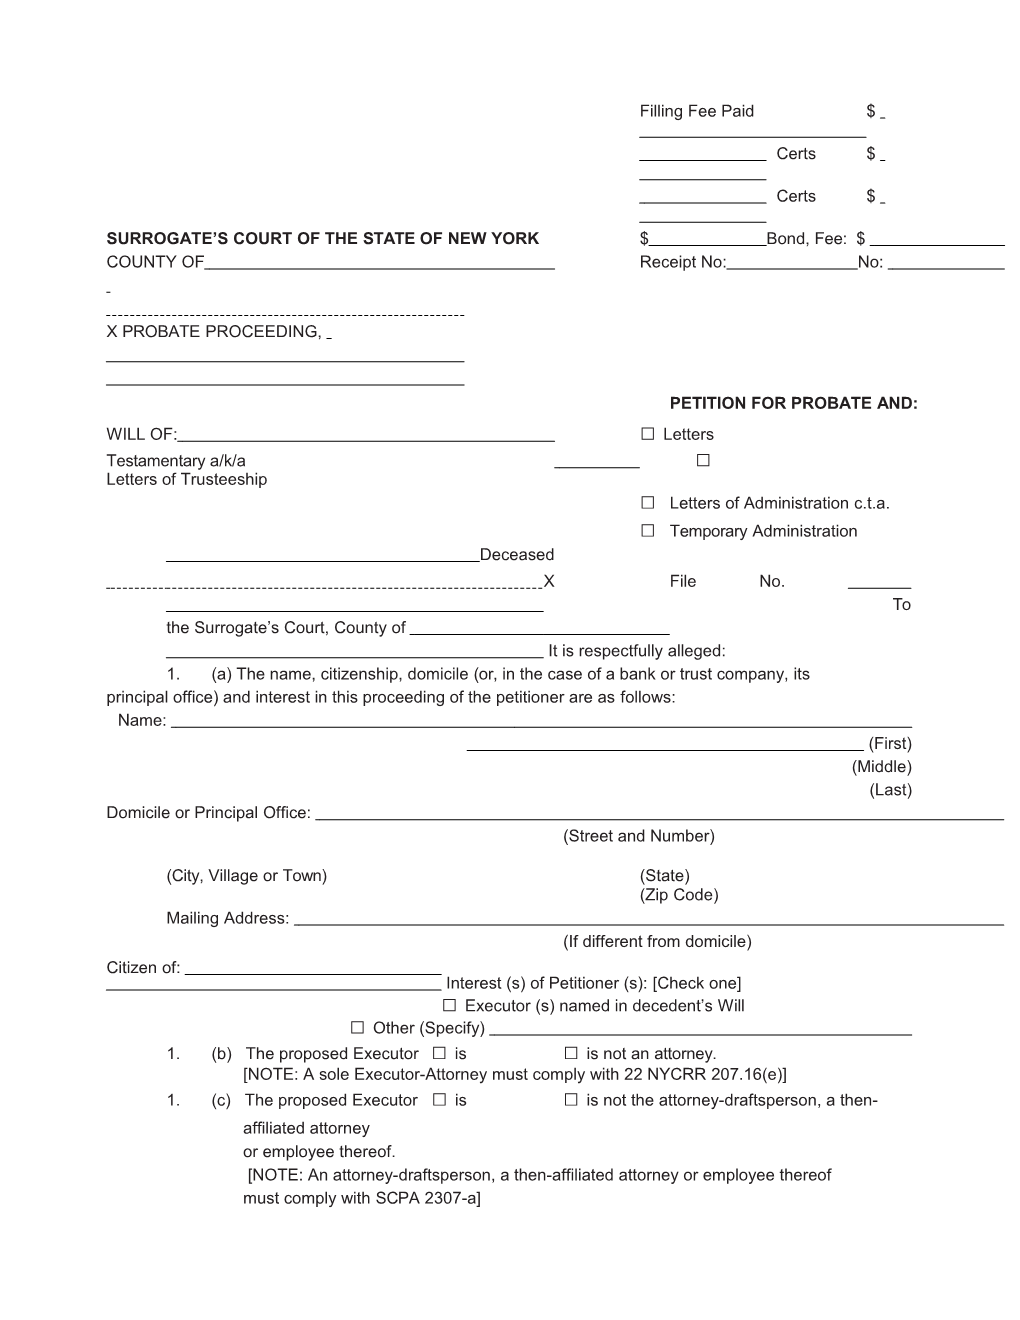 18 Petition for Probate-41618.Indd